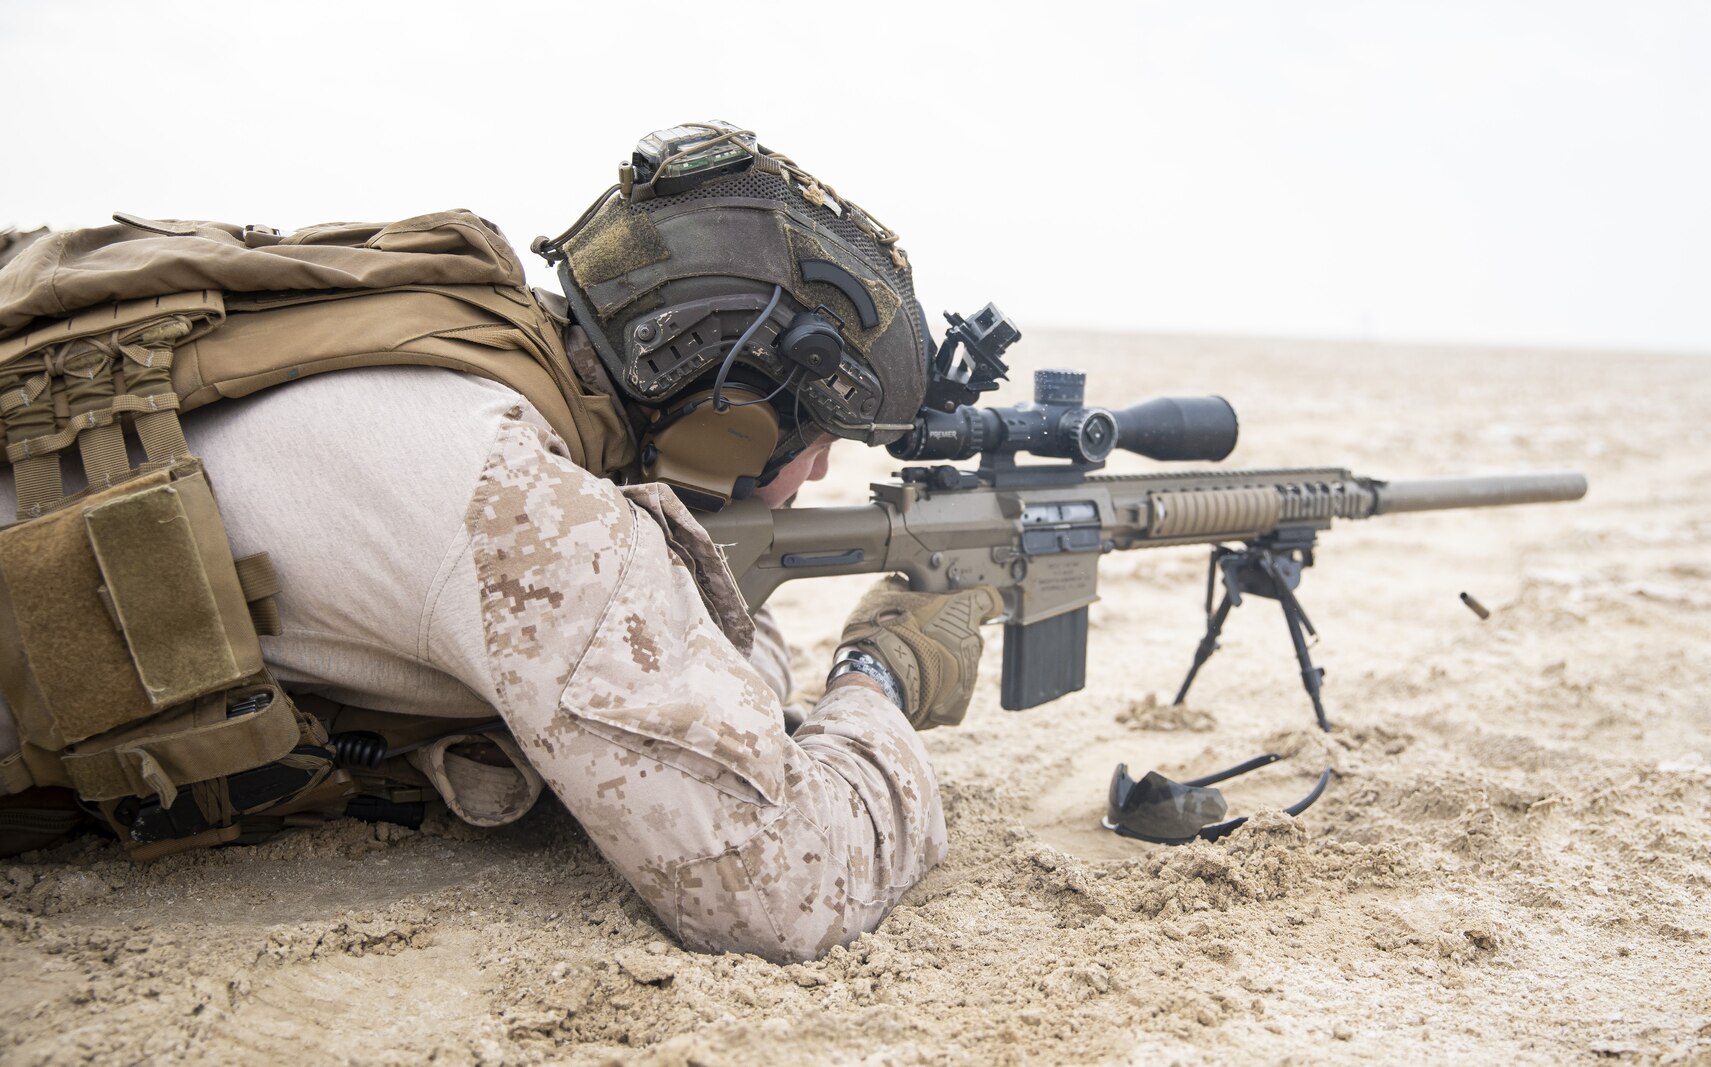 BAHRAIN (January 17, 2023) – A U.S. Marine assigned to Fleet Anti-Terrorism Security Team Central Command (FASTCENT) fires an M110 Semi-Automatic Sniper System during a live fire designated marksman range as part of exercise Neon Defender 23 in Bahrain, Jan. 17. Neon Defender is an annual bilateral training event between U.S. Naval Forces Central Command and Bahrain. The exercise focuses on maritime security, installation defense, naval construction, medical response and search and rescue training.